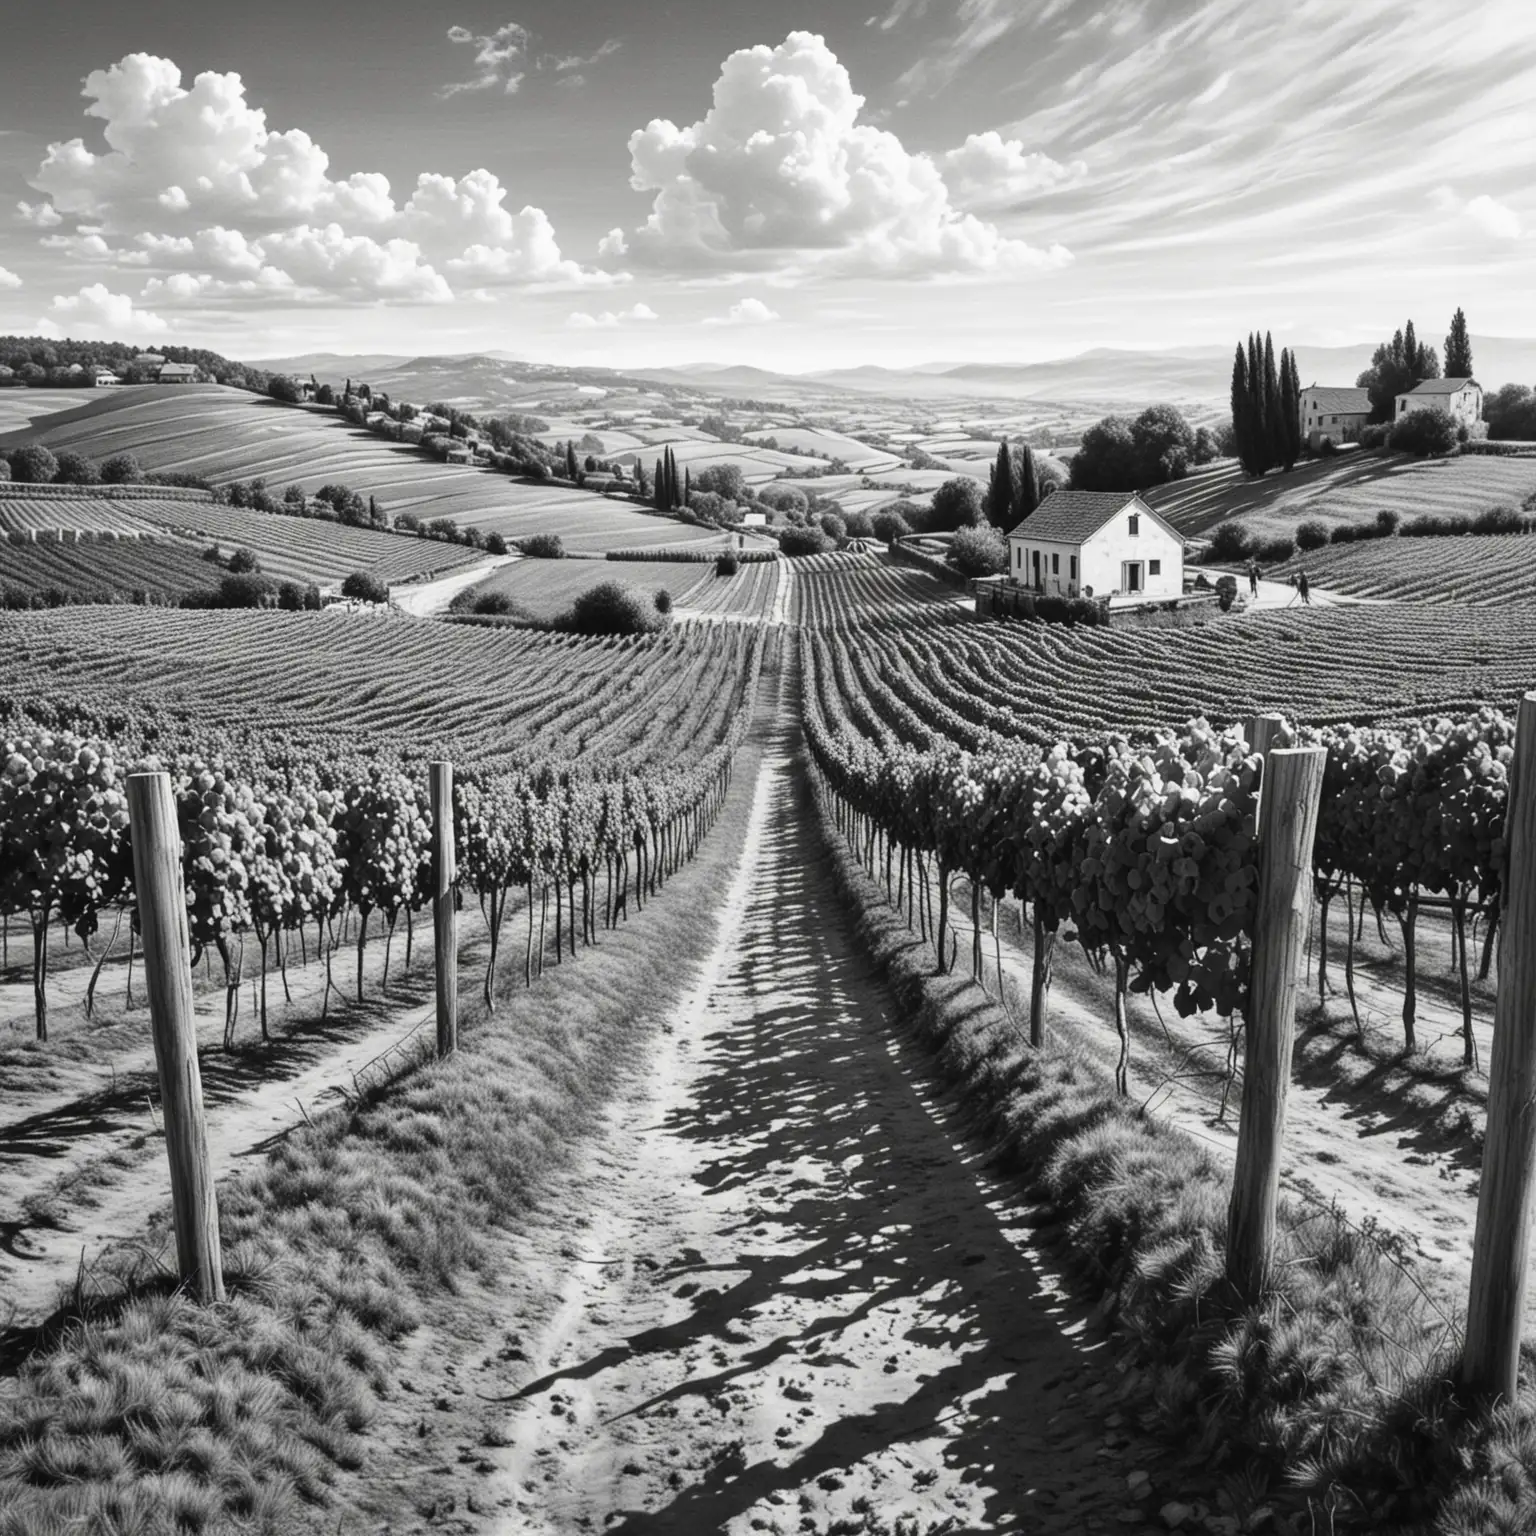 create a pencil drawn illustration of vineyard in black and white color